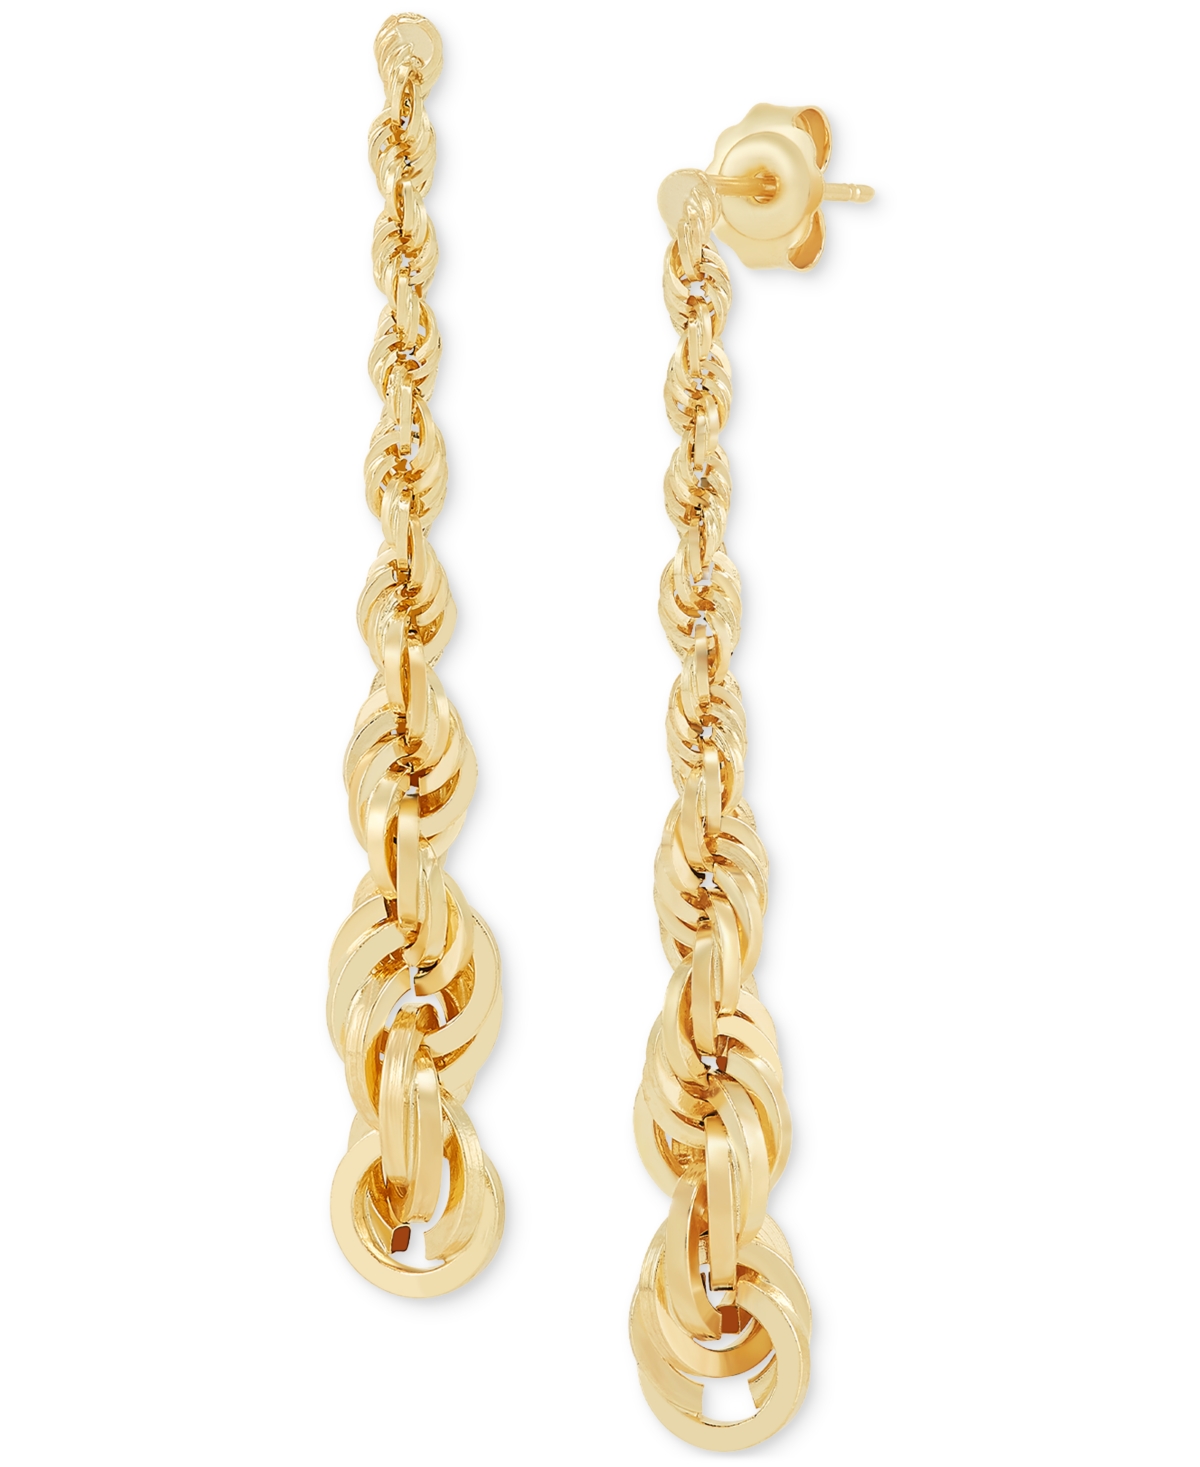 Graduated Rope Linear Earrings in 14k Gold, 1 1/2 inch - Yellow Gold